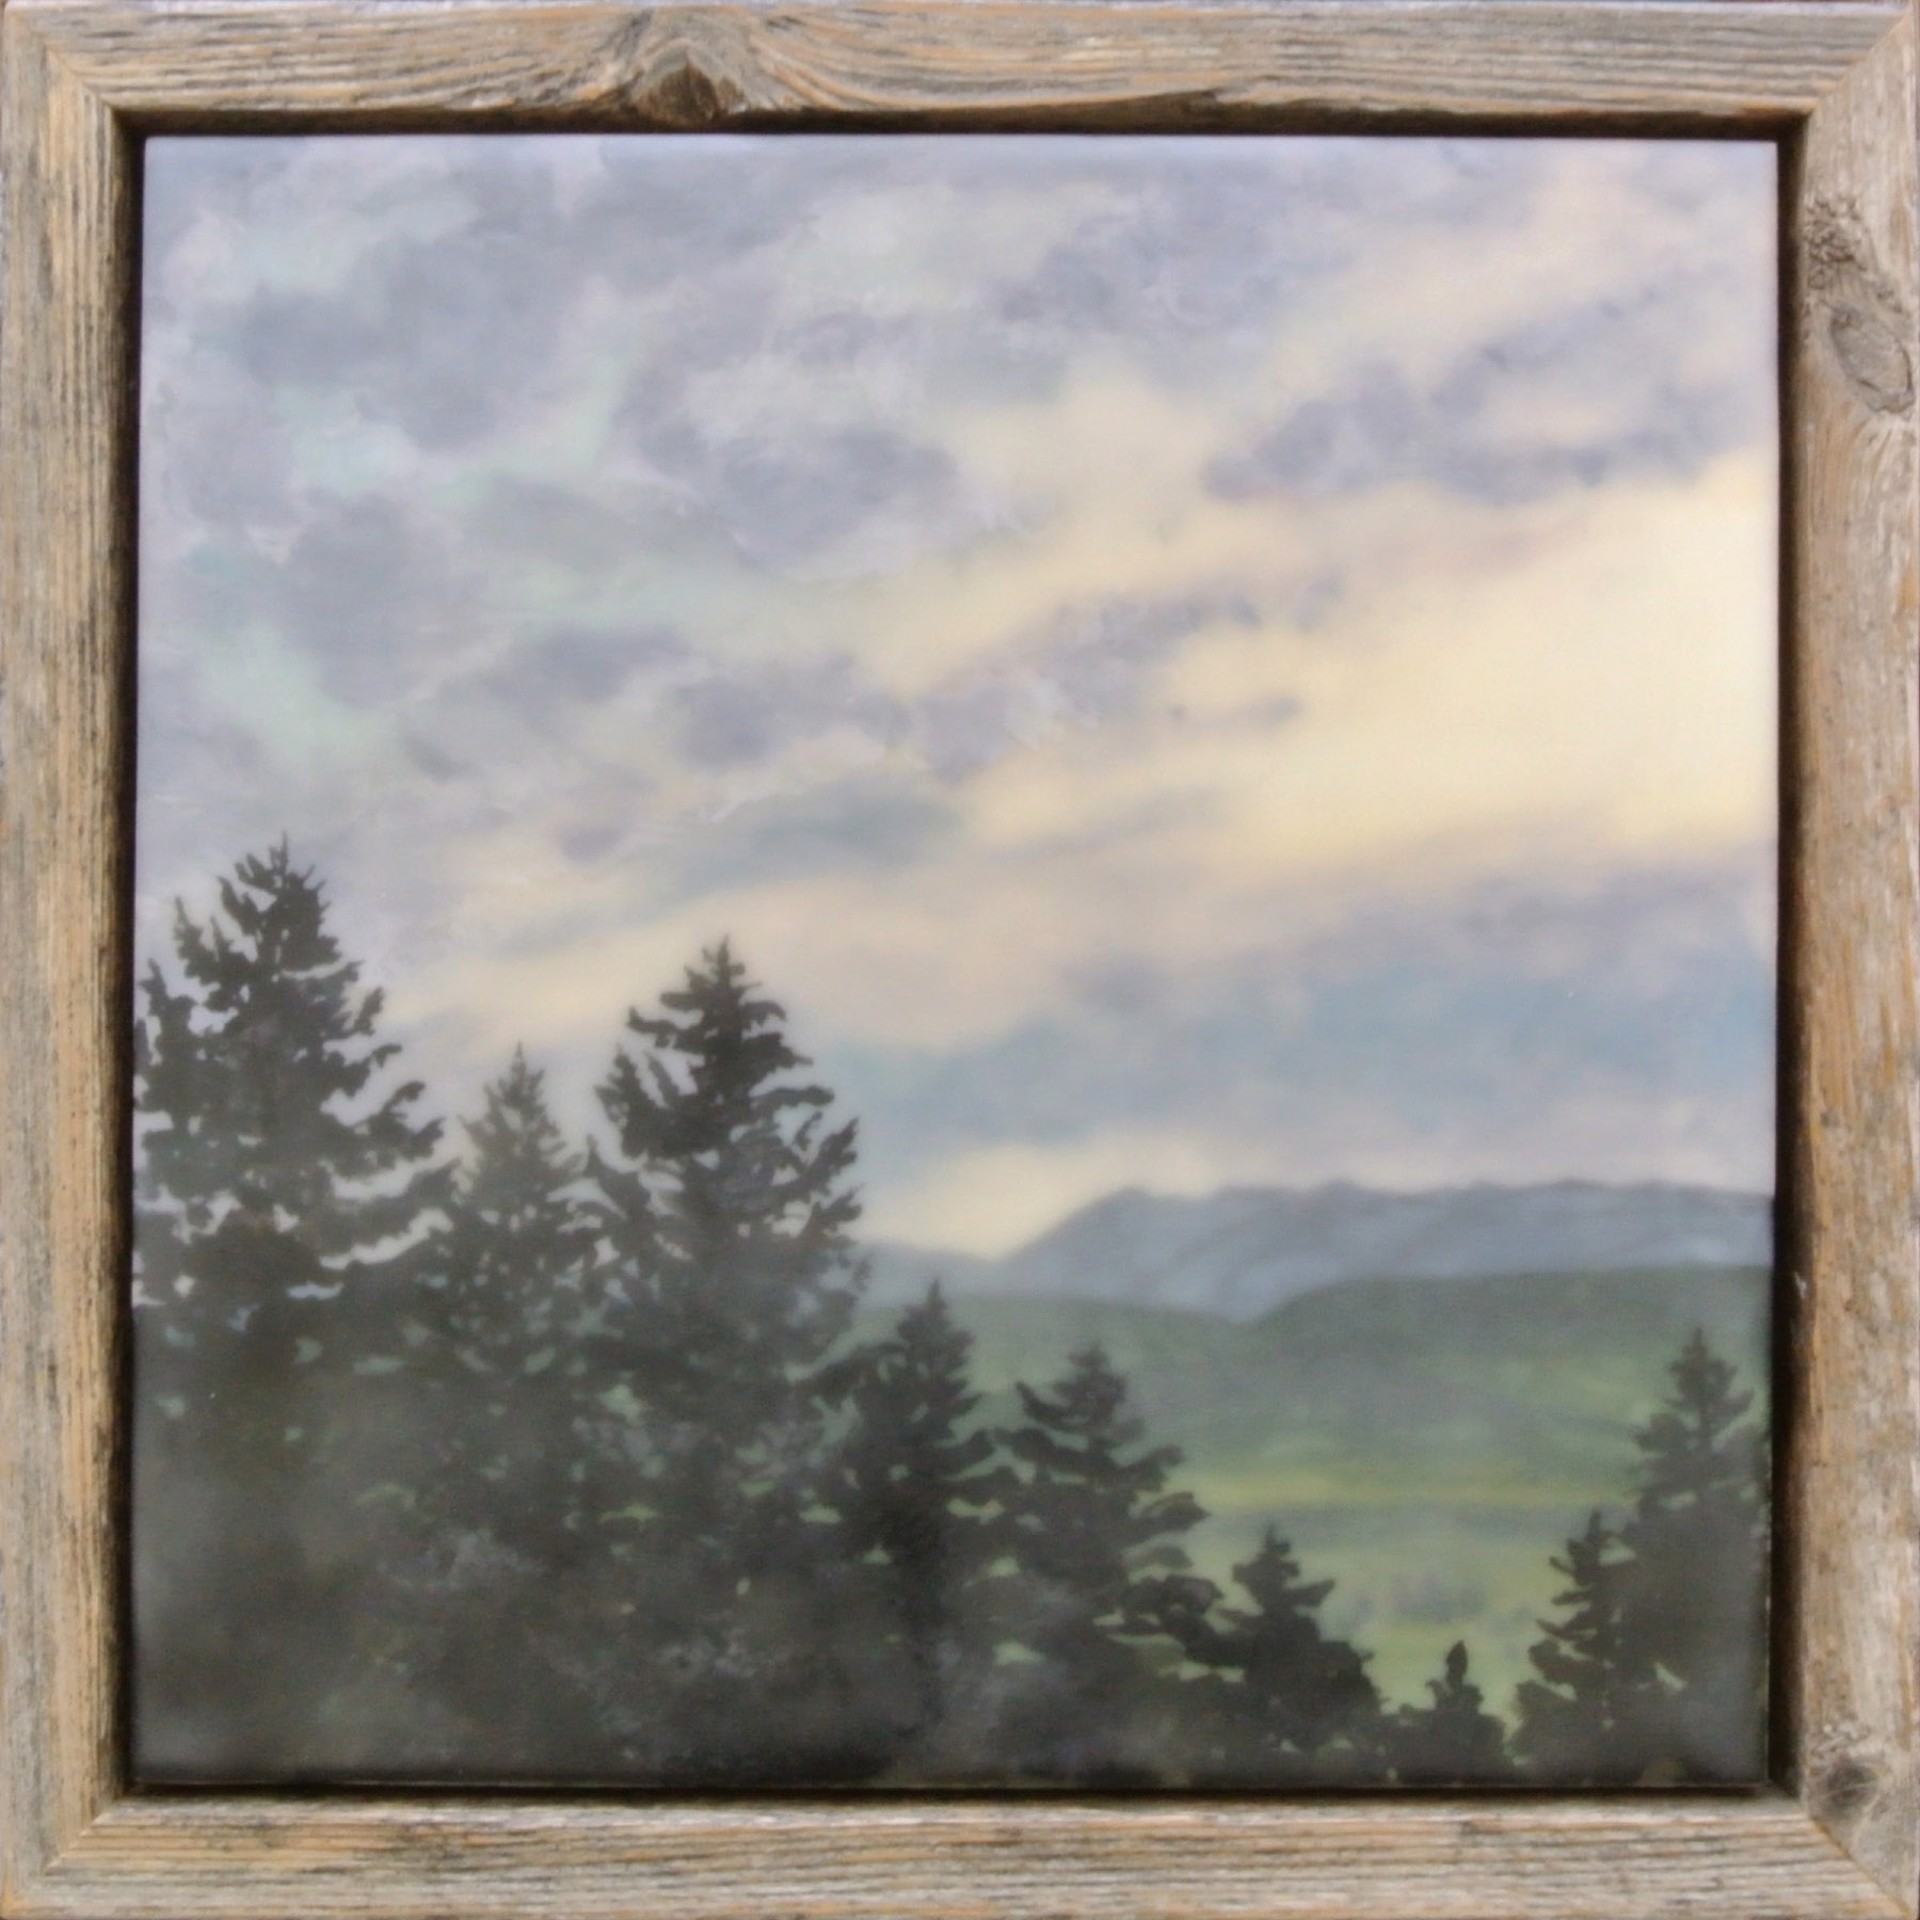 An Encaustic Painting Of A Valley And Hills Through Trees With Purple Sunsetting Sky, By Bridgette Meinhold